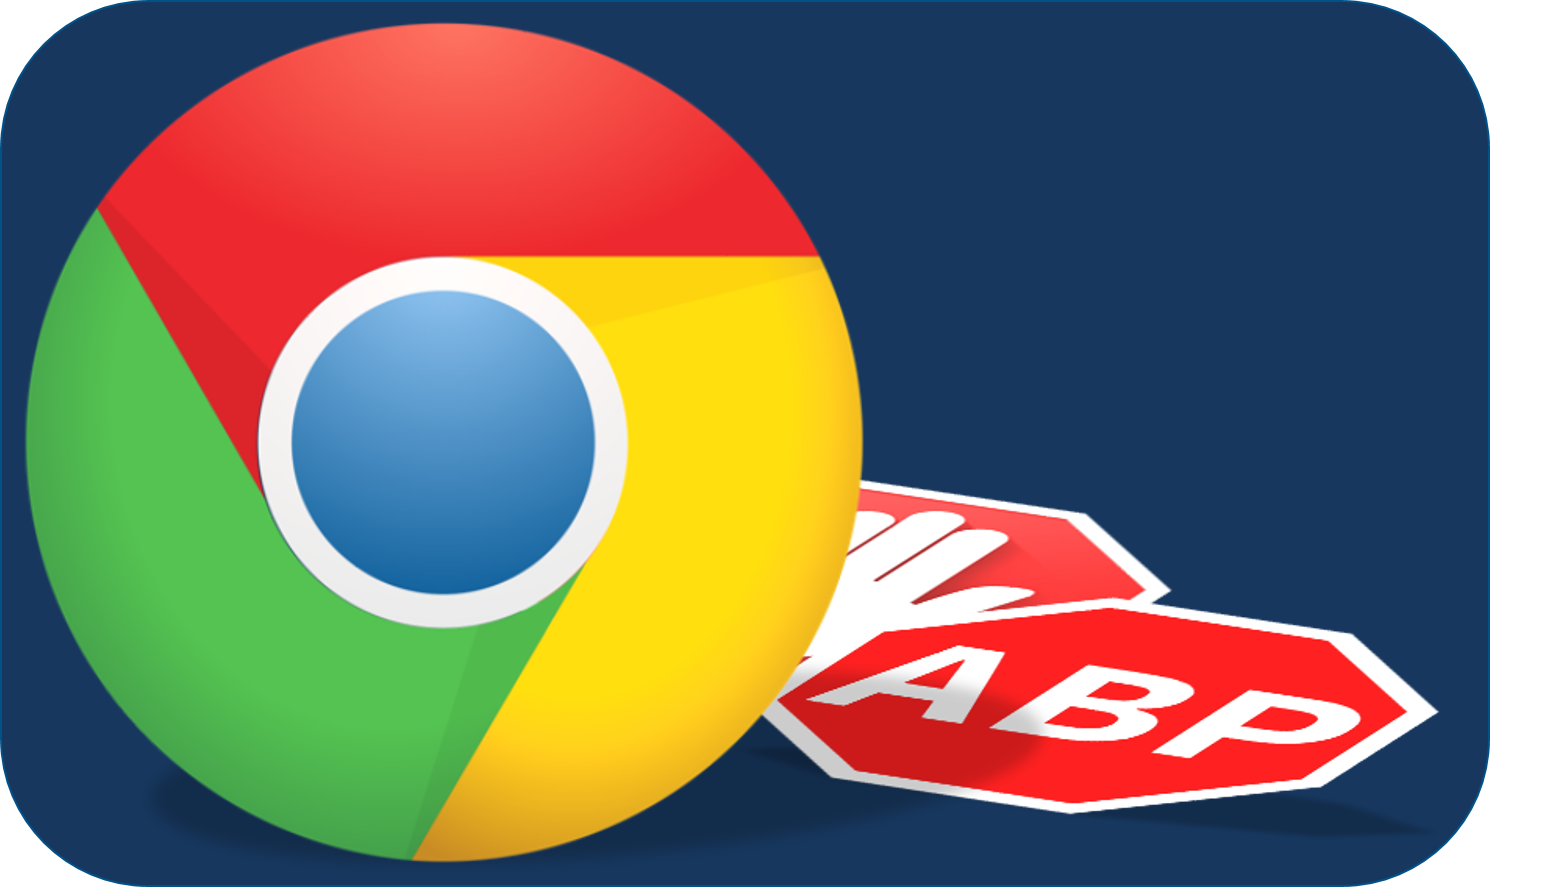 Chrome Hopes to Unblock your Ads – by Blocking Ads!